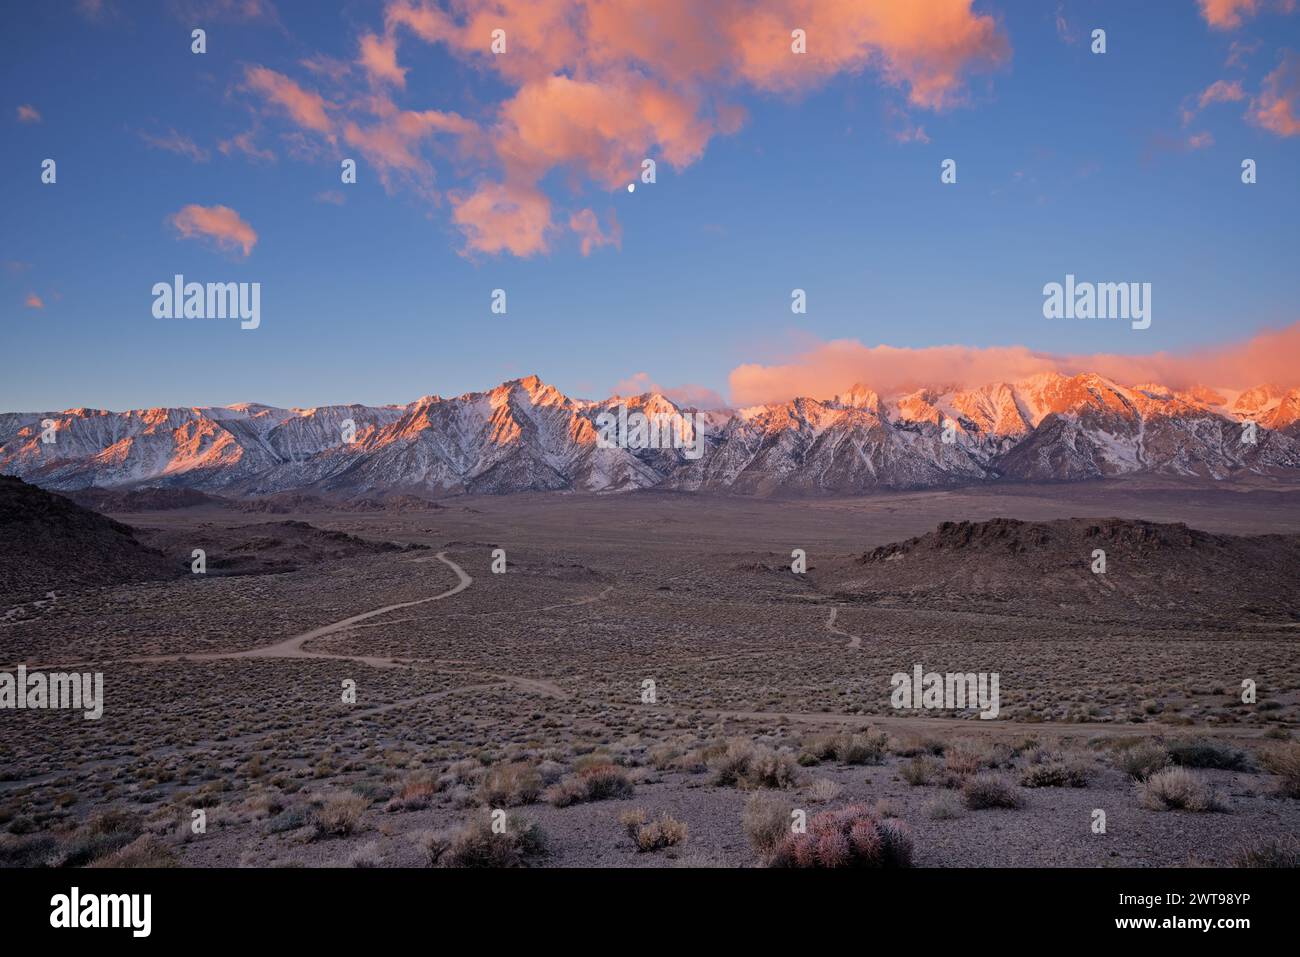 Hish Sierra sunrise from the Alabama Hills with Lone Pine Peak and clouds over the mountains Stock Photo